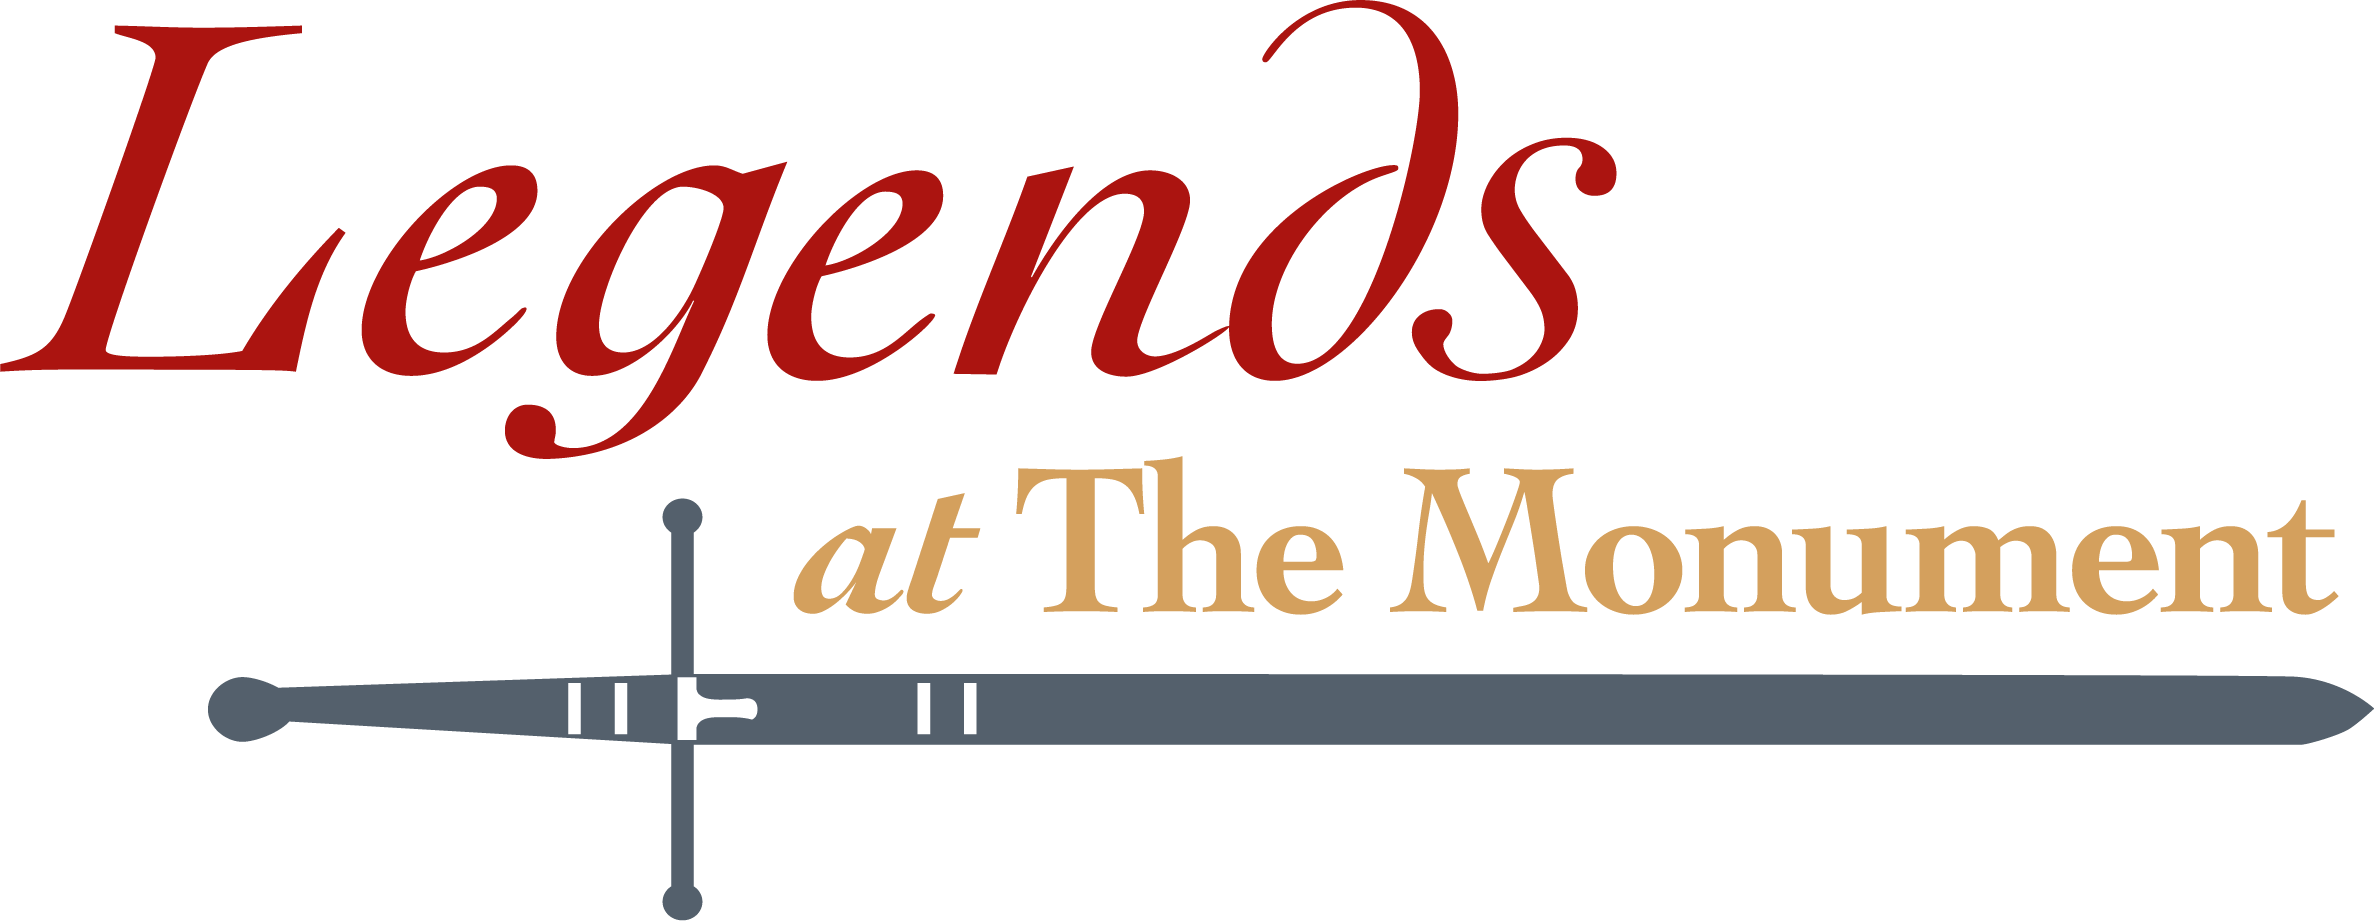 logo for Legends at the Monument